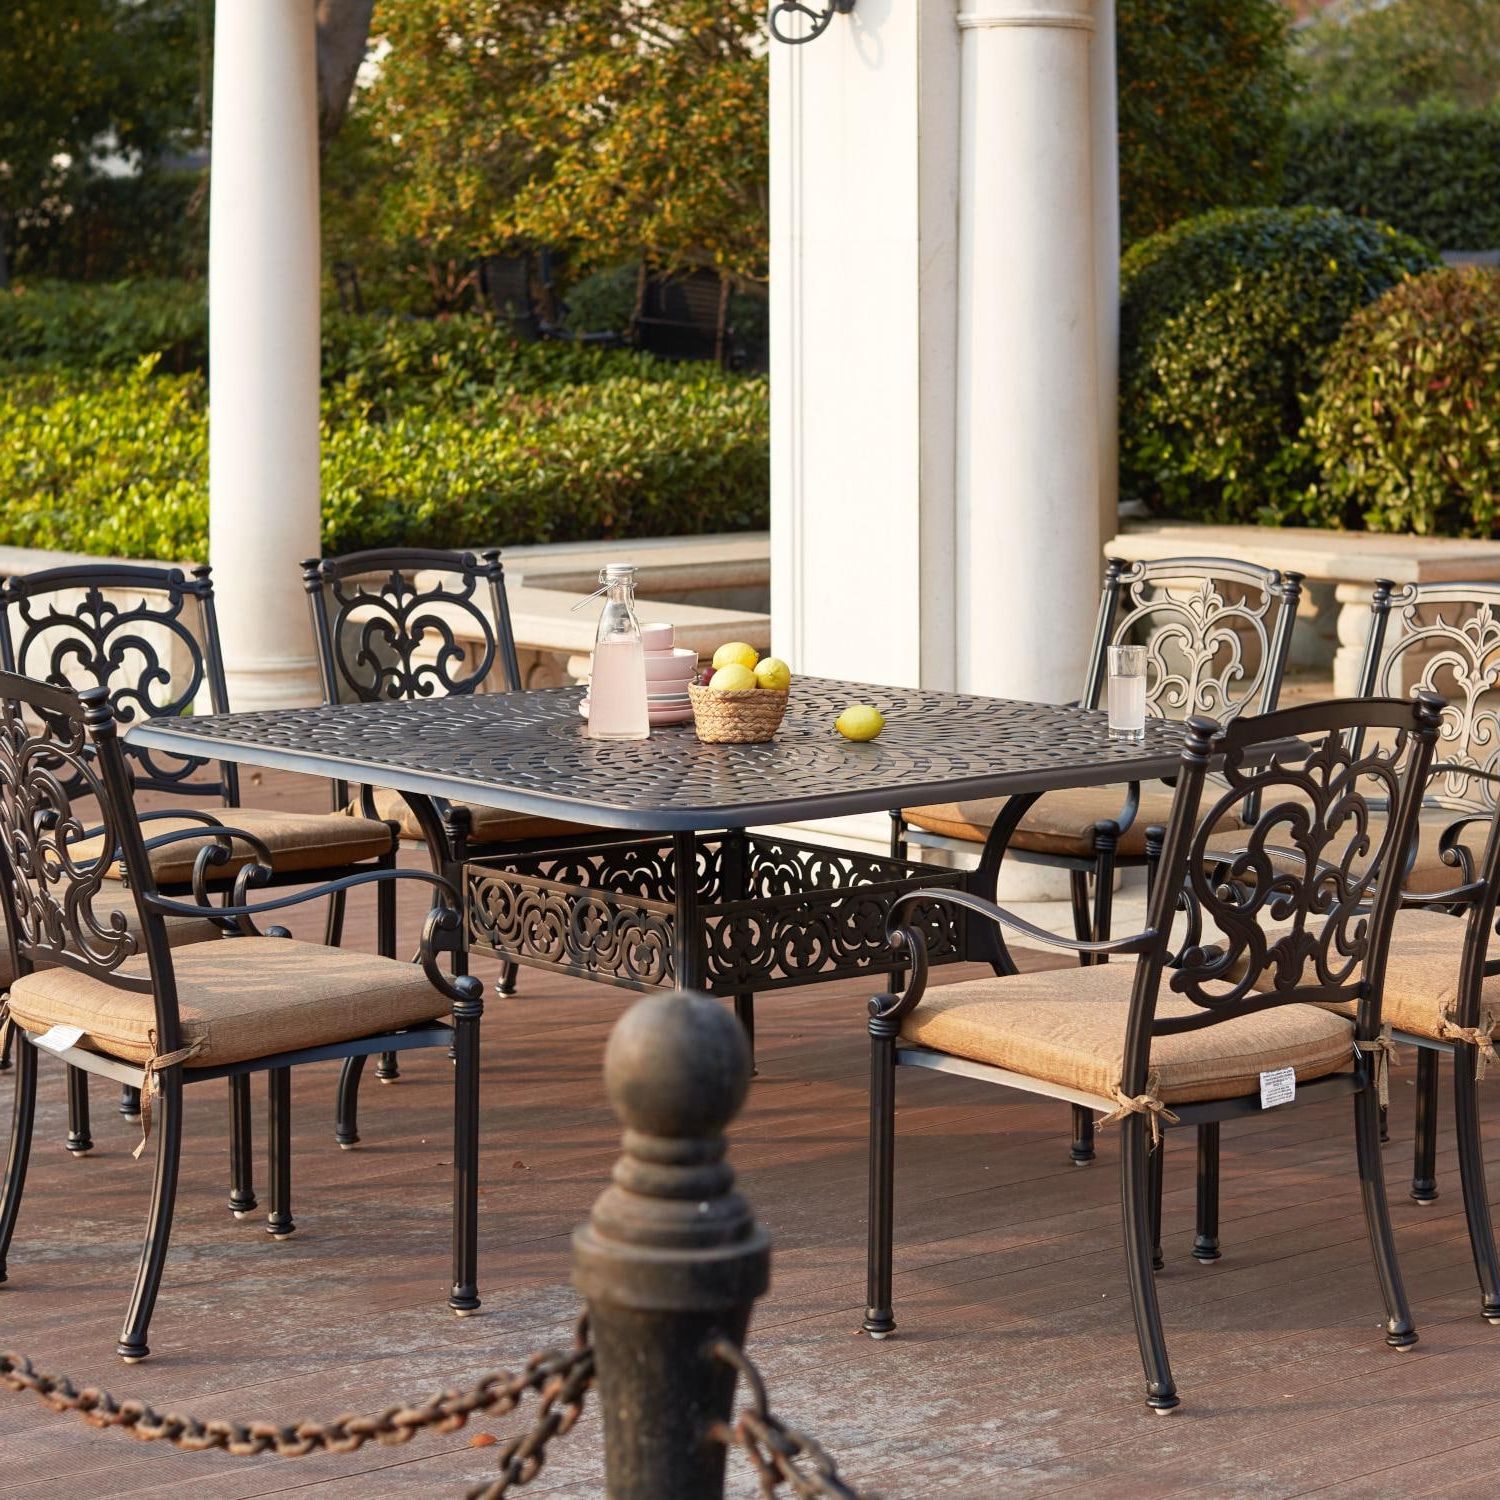 Square 9 Piece Outdoor Dining Sets Intended For Most Popular Darlee Santa Barbara 9 Piece Cast Aluminum Patio Dining Set With Square (View 1 of 15)